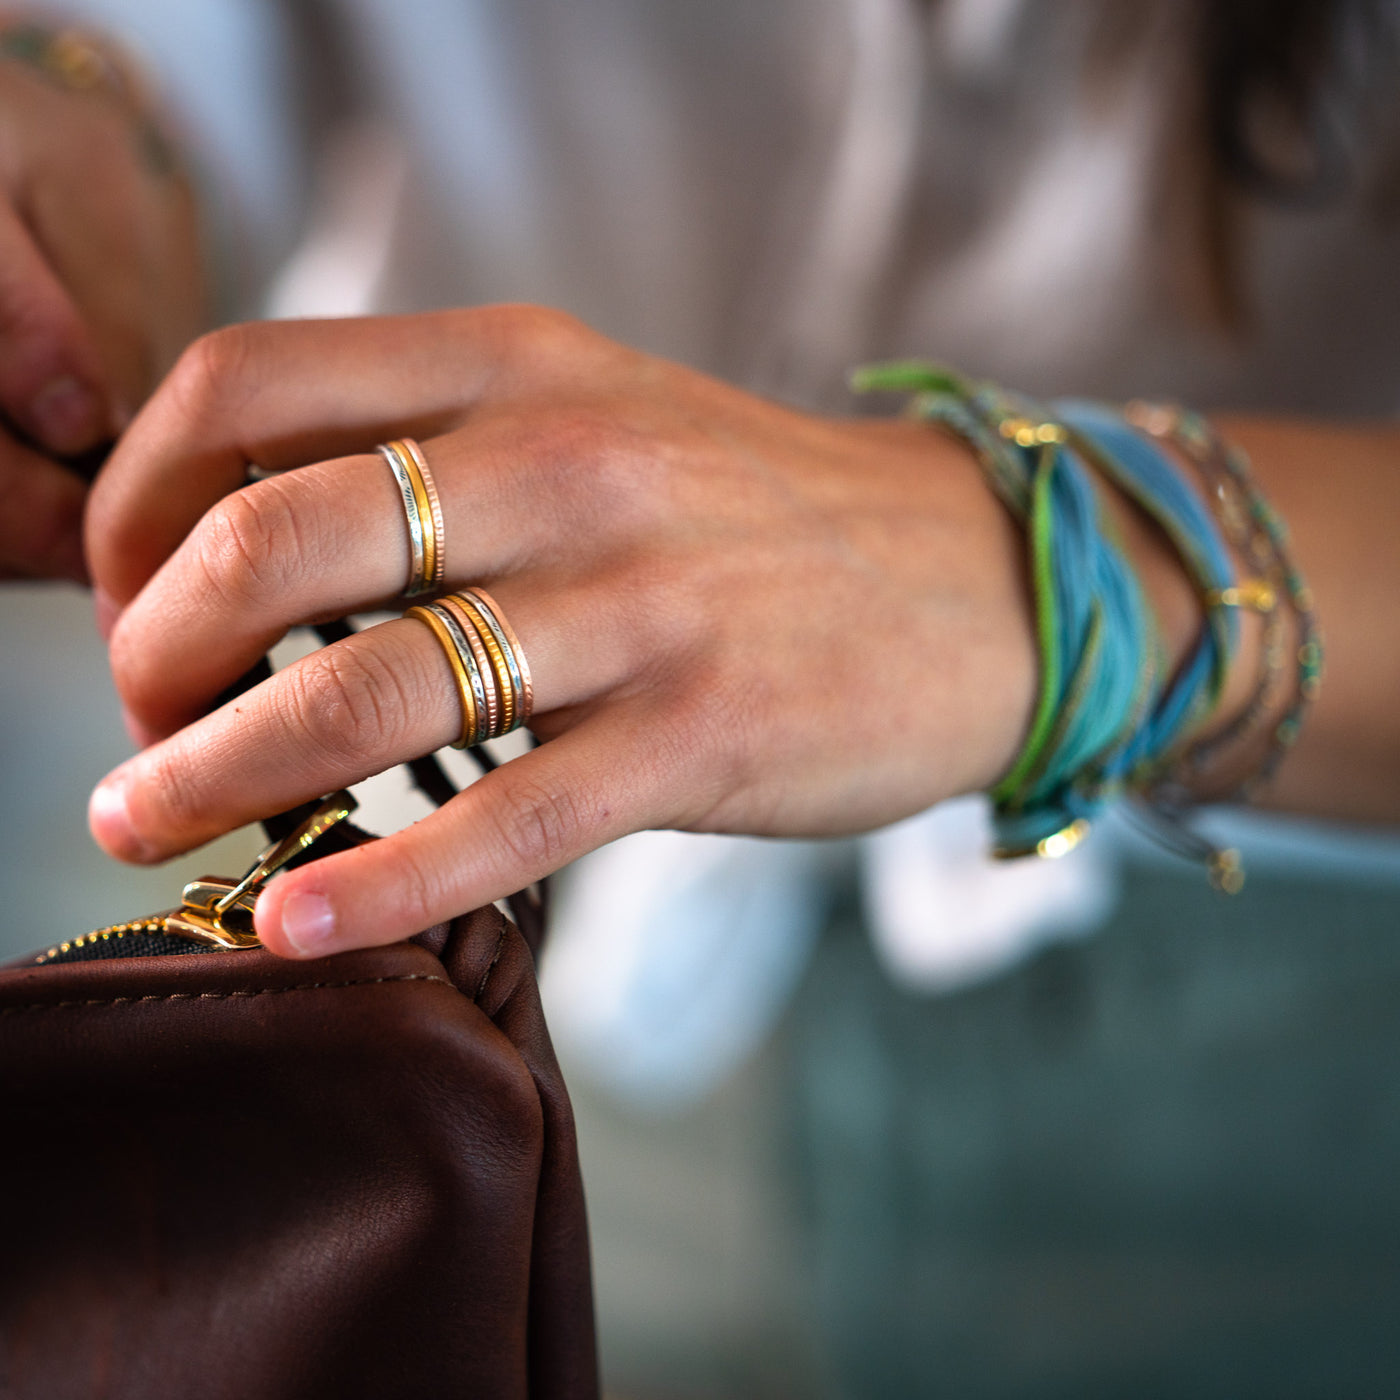 Toltec set of three rings are sleek and durable, these are a Bronwen Jewelry staple for travel and everyday adventure